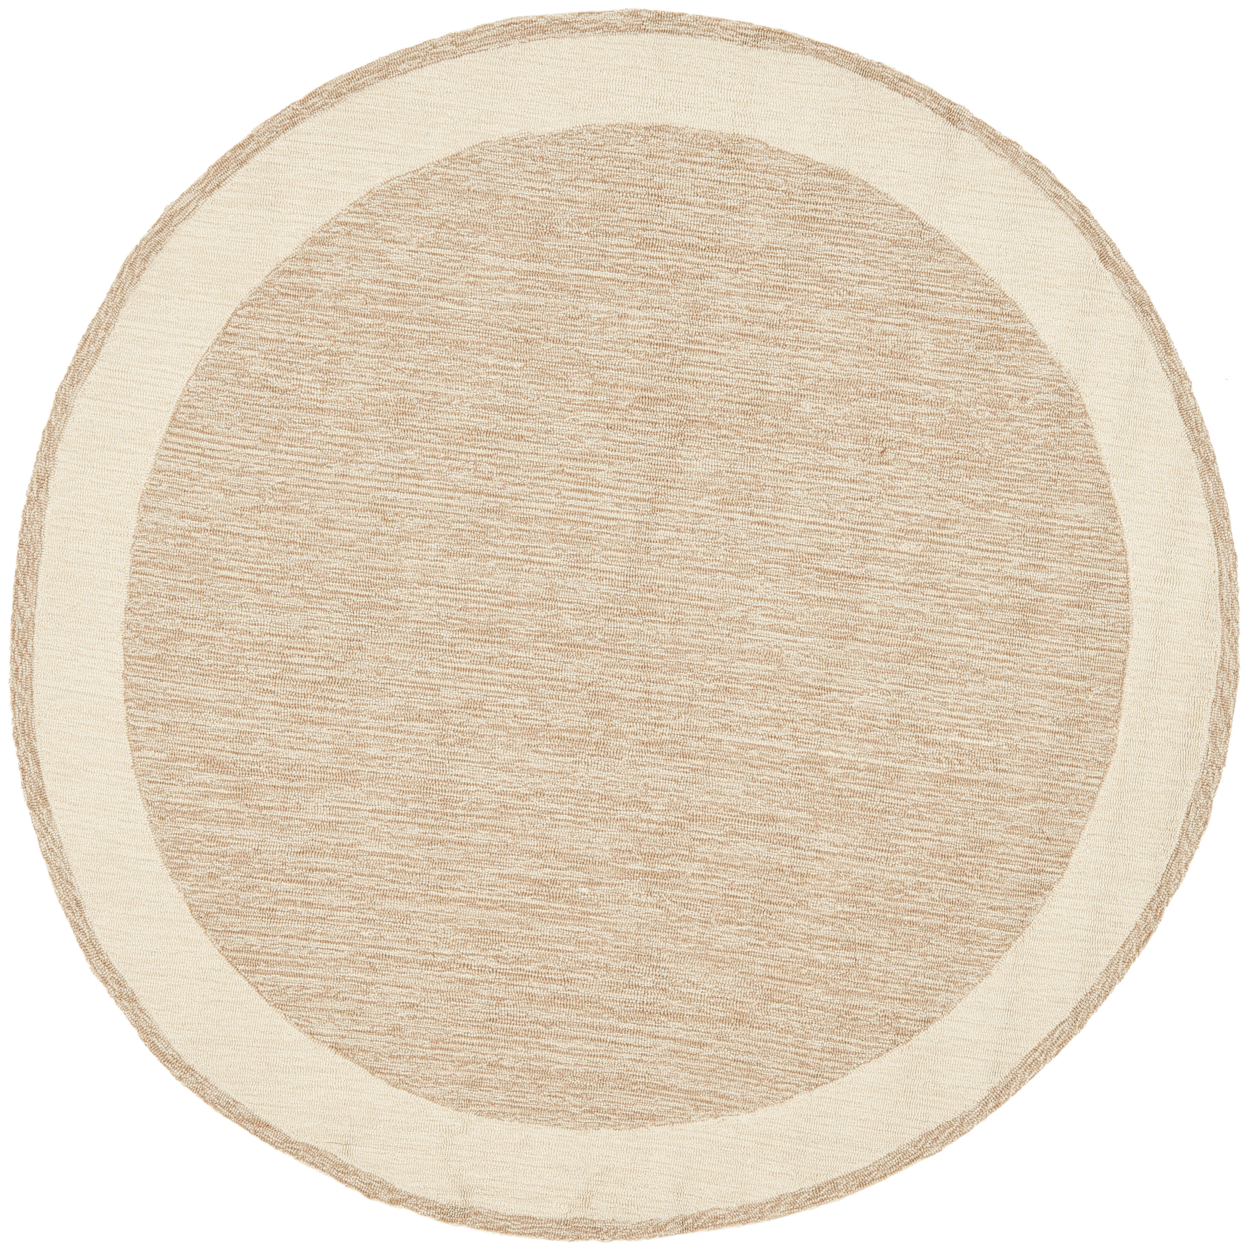 SAFAVIEH Easy Care EZC427A Hand-hooked Natural Rug - 6' Round